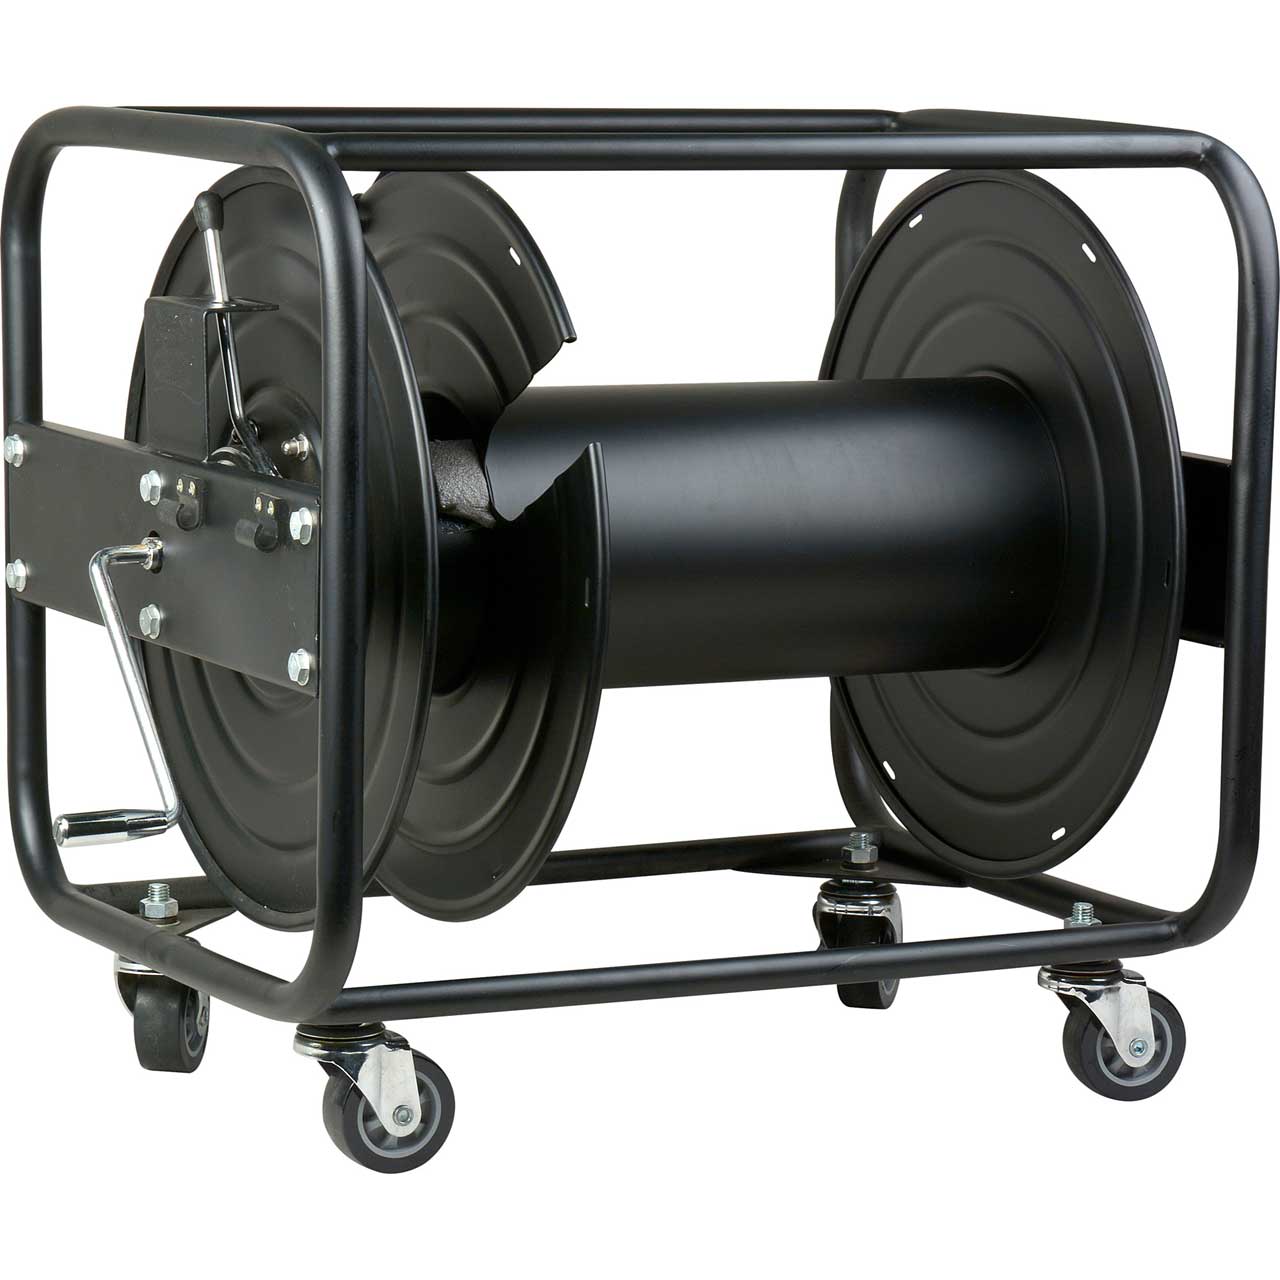 Hannay Reels Avc-16-14-16-de Cable Reel with Drum Extension